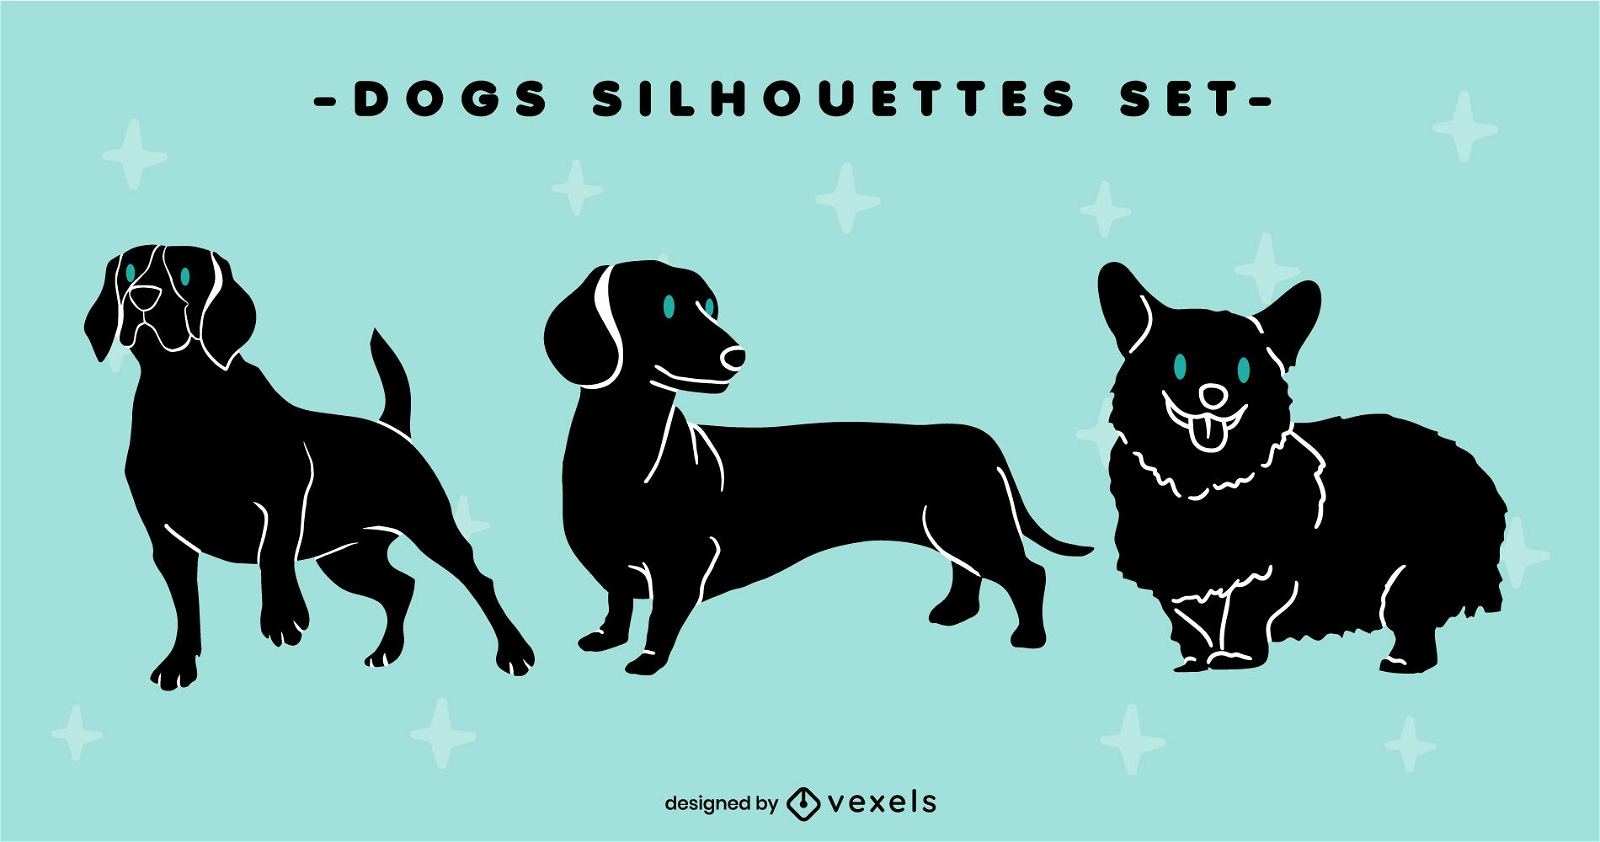 Tiny dogs silhouettes set